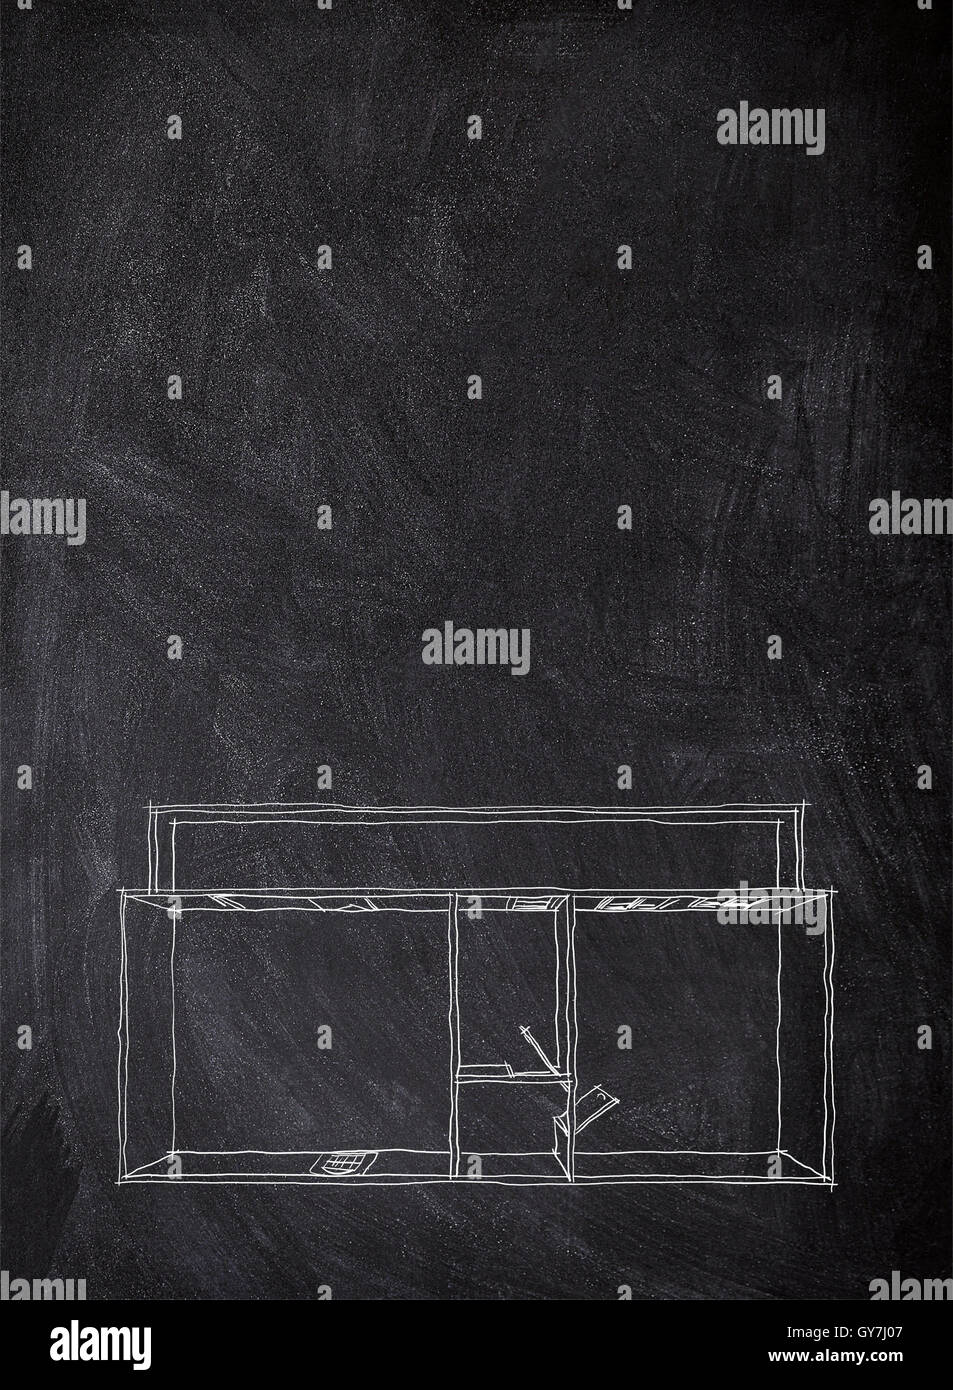 Digital 2d chalk sketch drawing of empty home apartment on blackboard Stock Photo